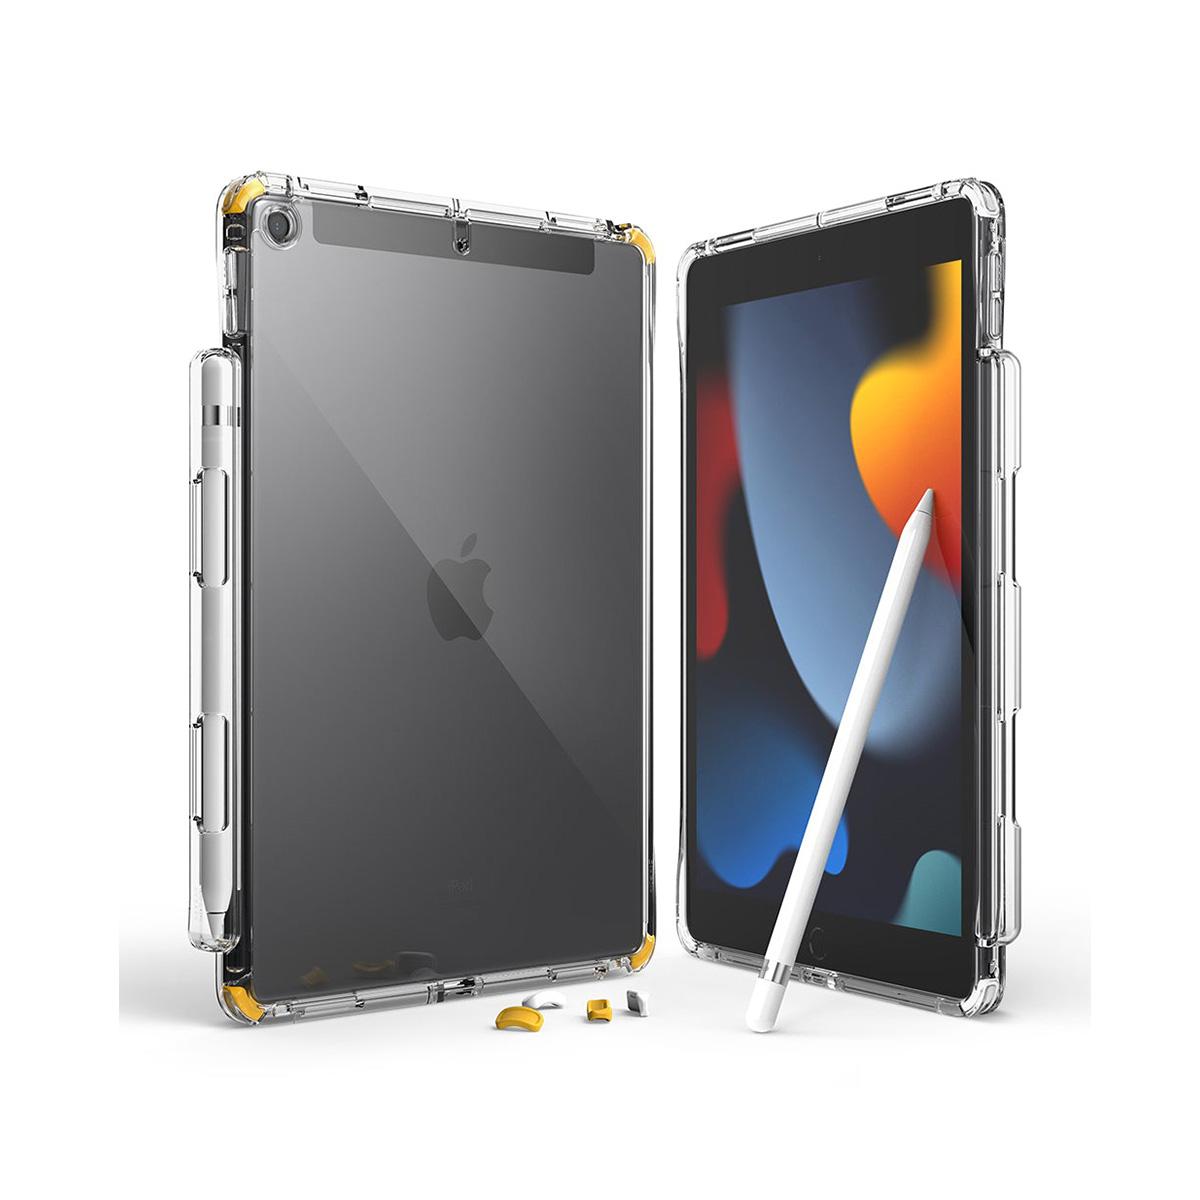 Ringke Fusion+ Clear Case for iPad 9th Gen (10.2″/7/8)